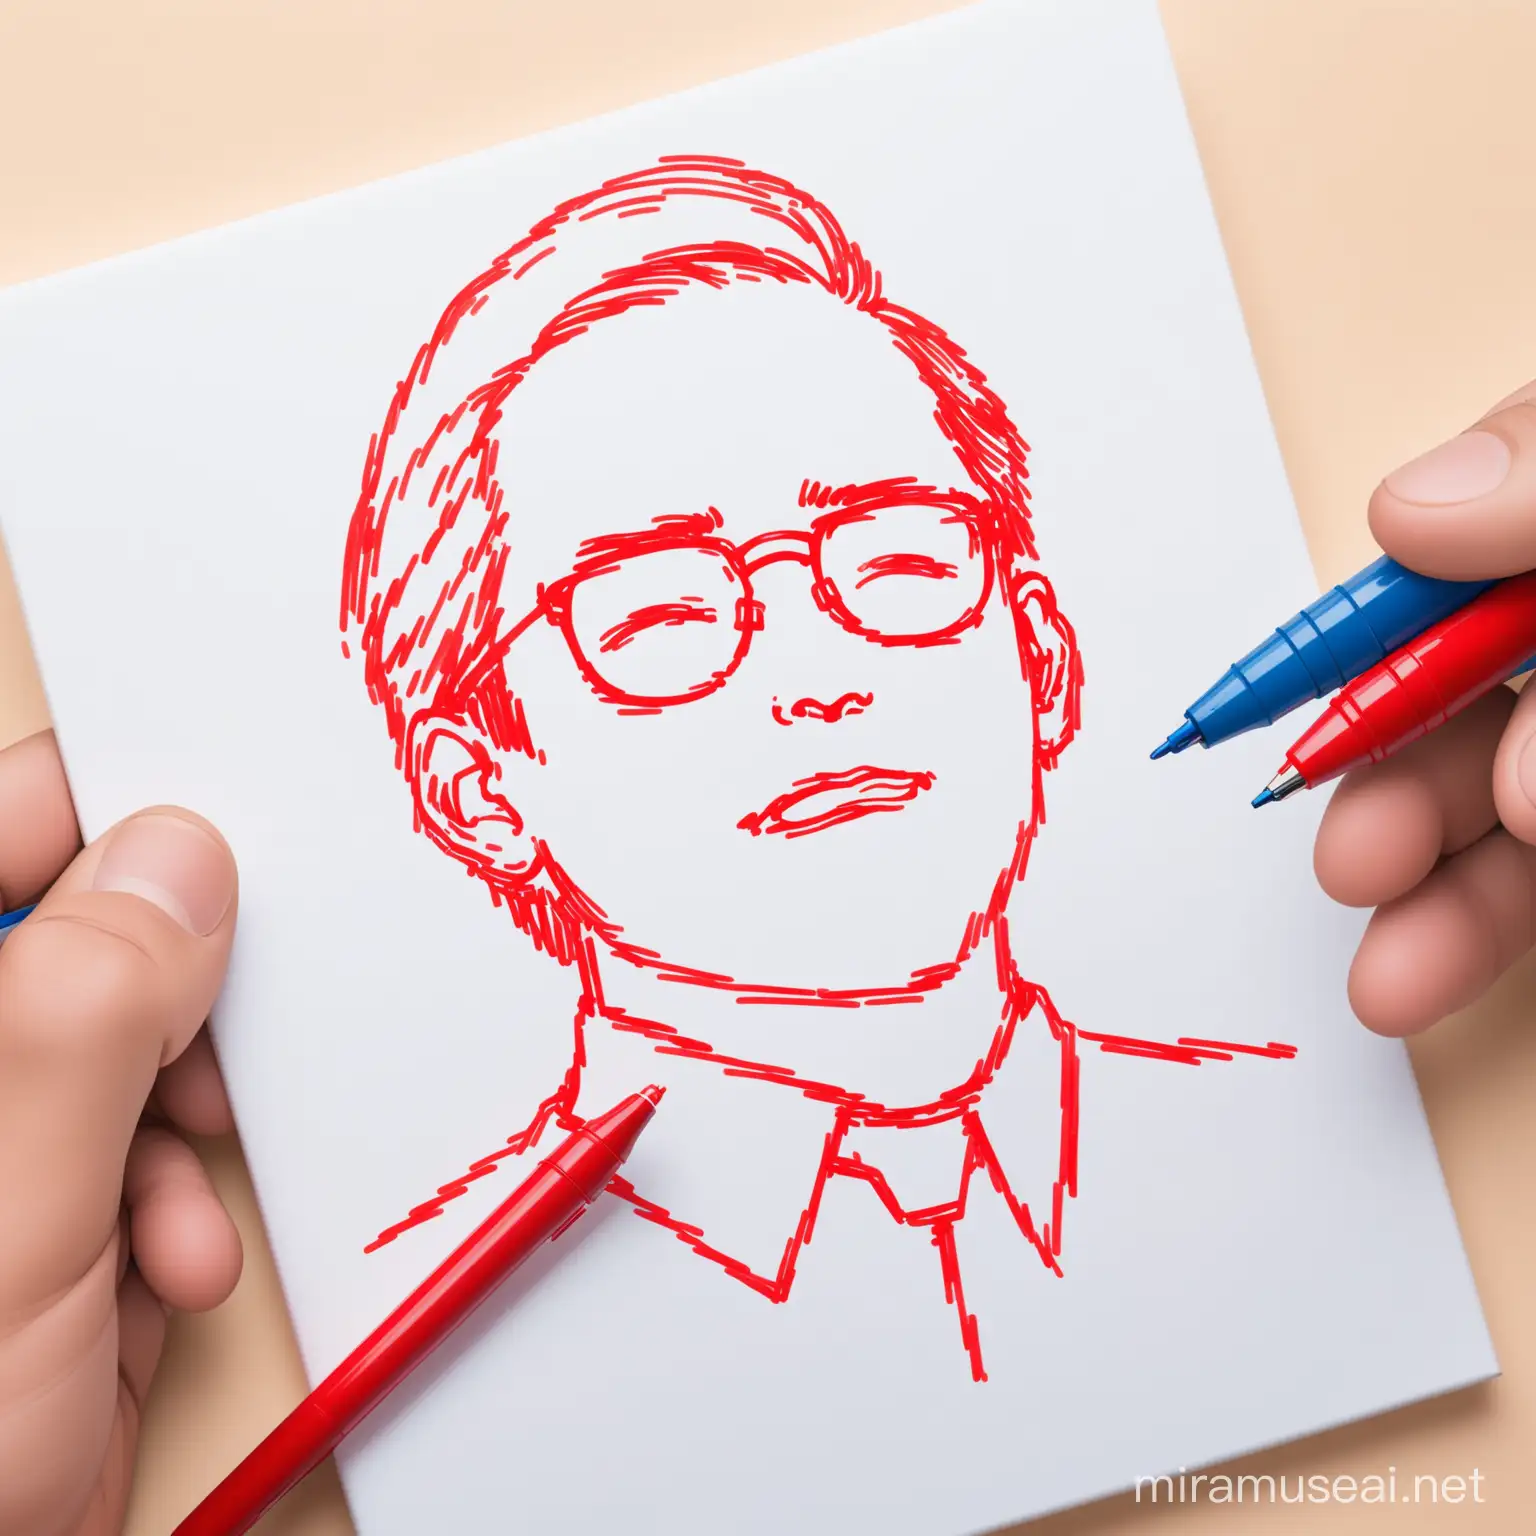 Generate animation picture of a man holding a red and blue pens